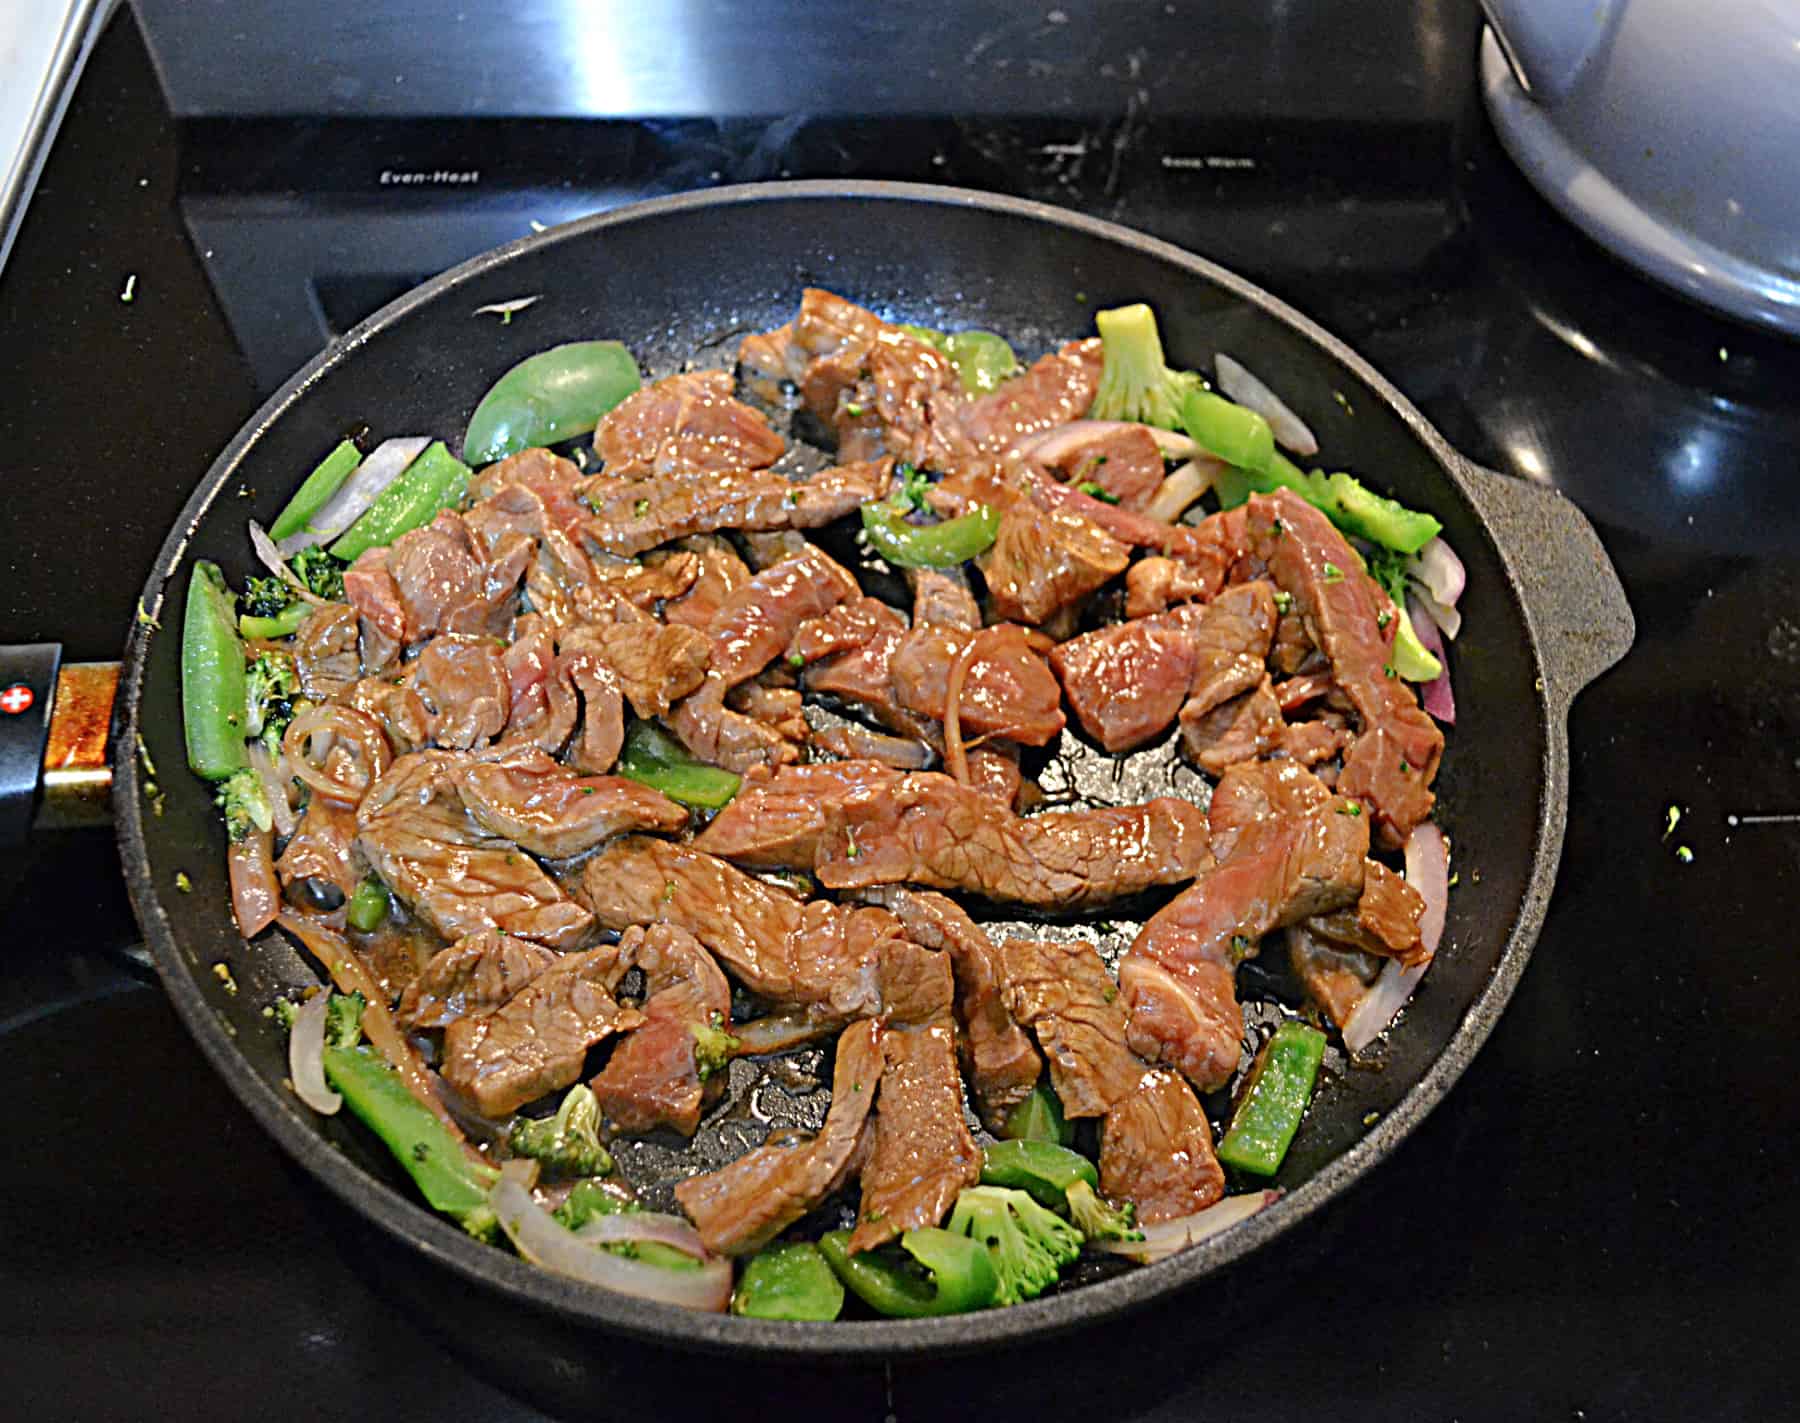 A skillet with beef and broccoli in it.